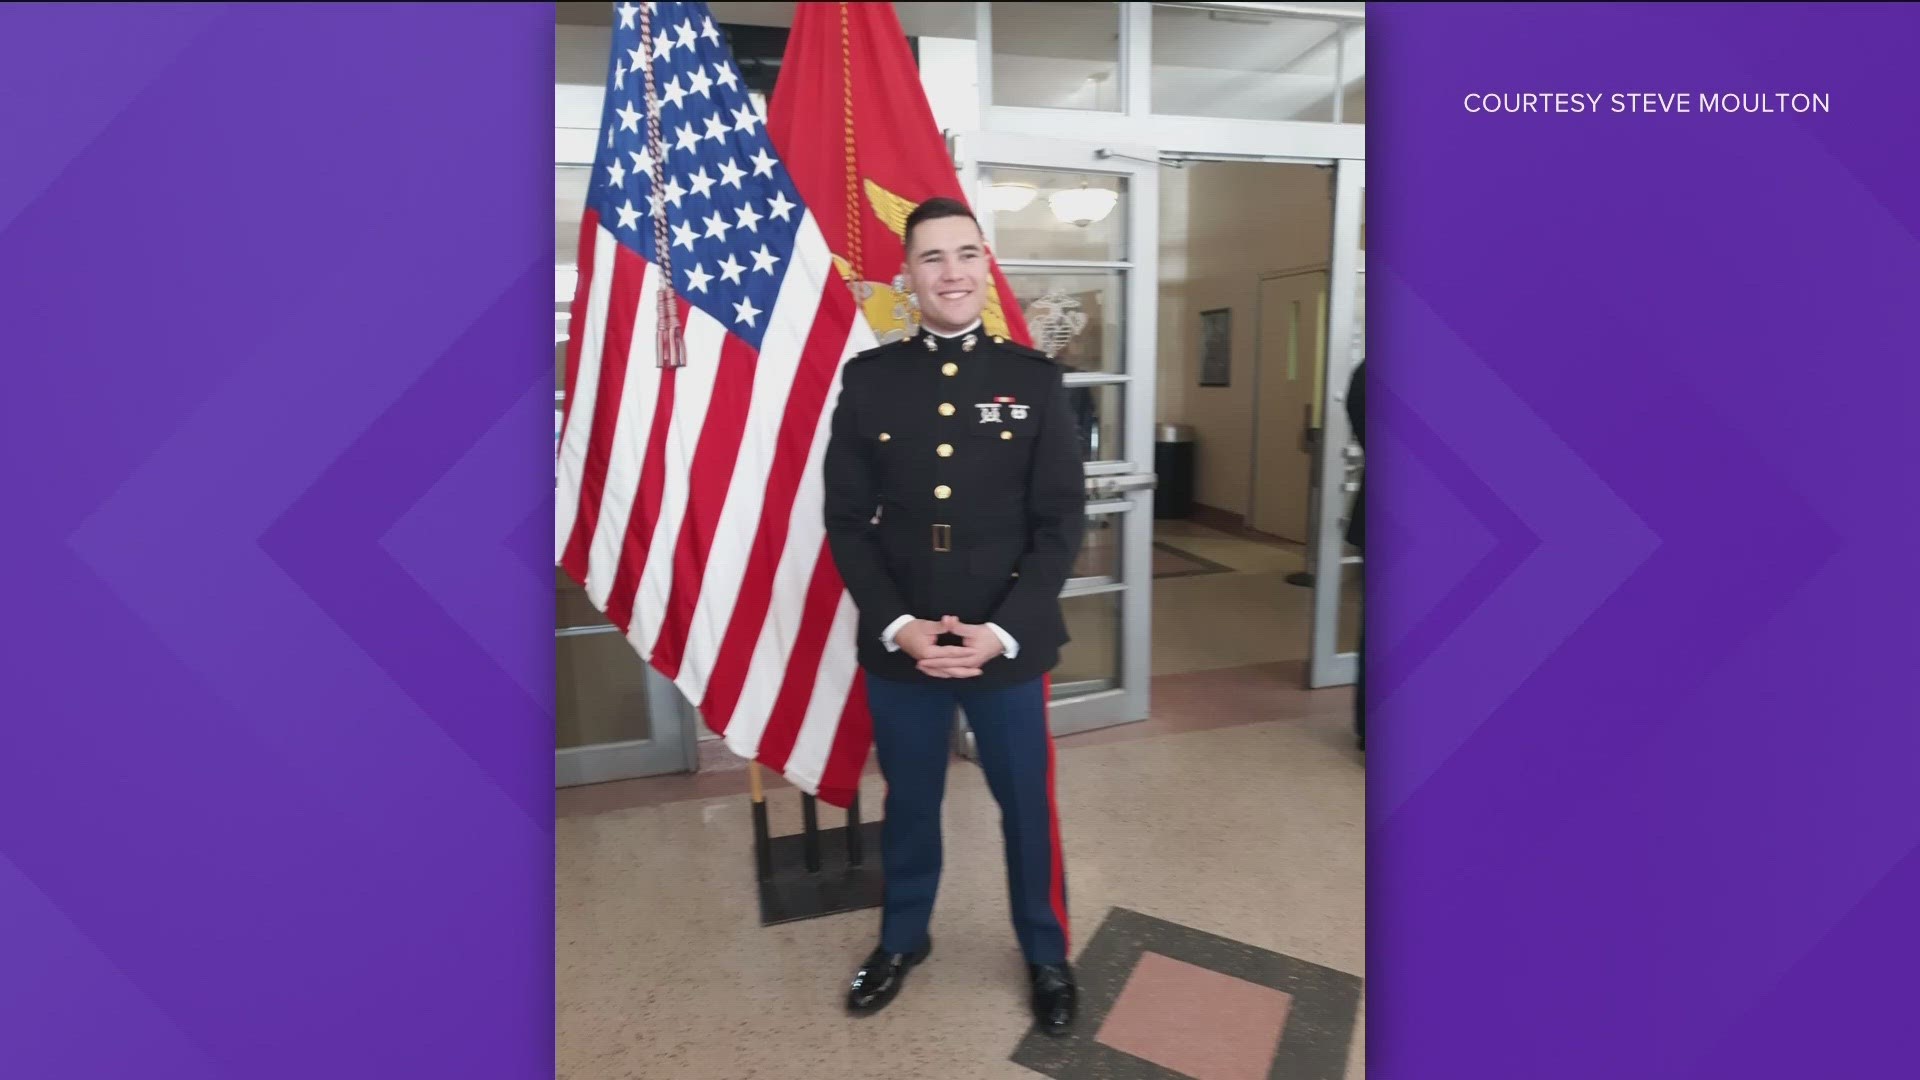 The U.S. Marine Corps on Friday said Benjamin Moulton of Emmett was among the five Miramar-based Marines who were killed in a helicopter crash outside San Diego.